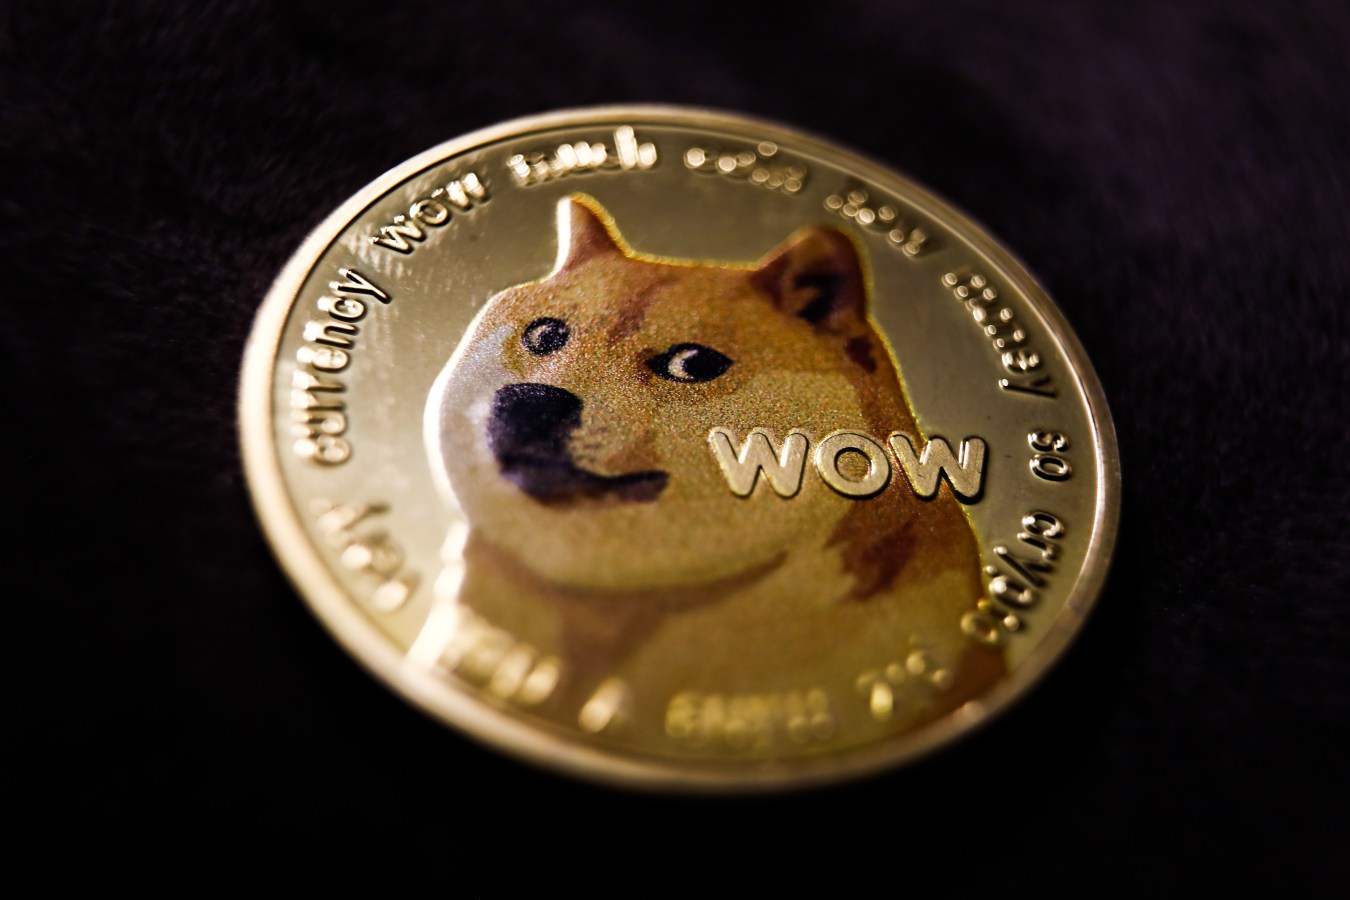 Dogecoin briefly reached a market cap of about US$70 billion last year when it peaked near $0.70 before quickly losing its lustre.